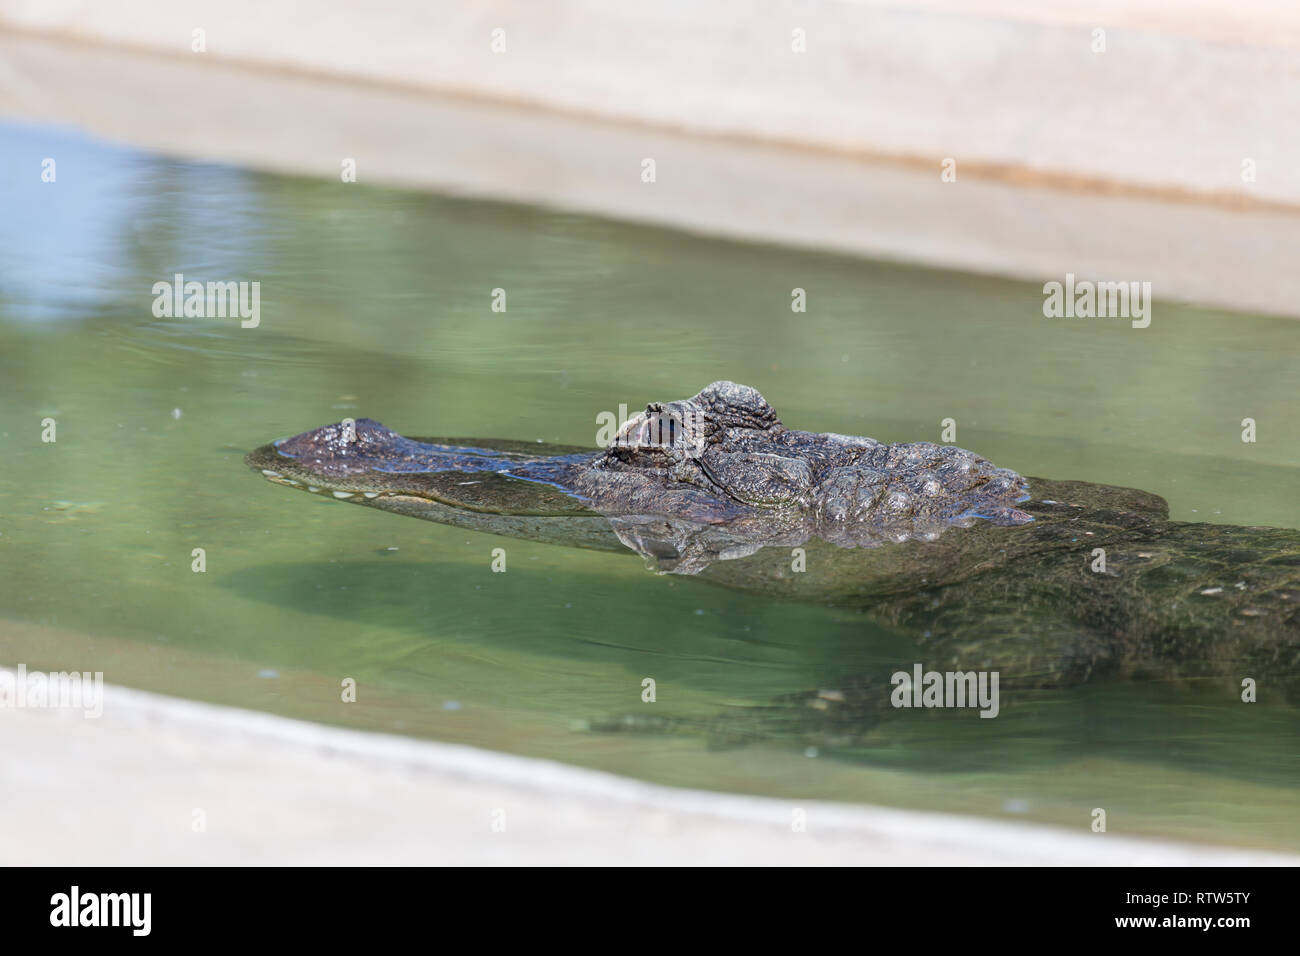 A alligator submerged in clear shallow water with only its eyes and top of its nose above water. Stock Photo